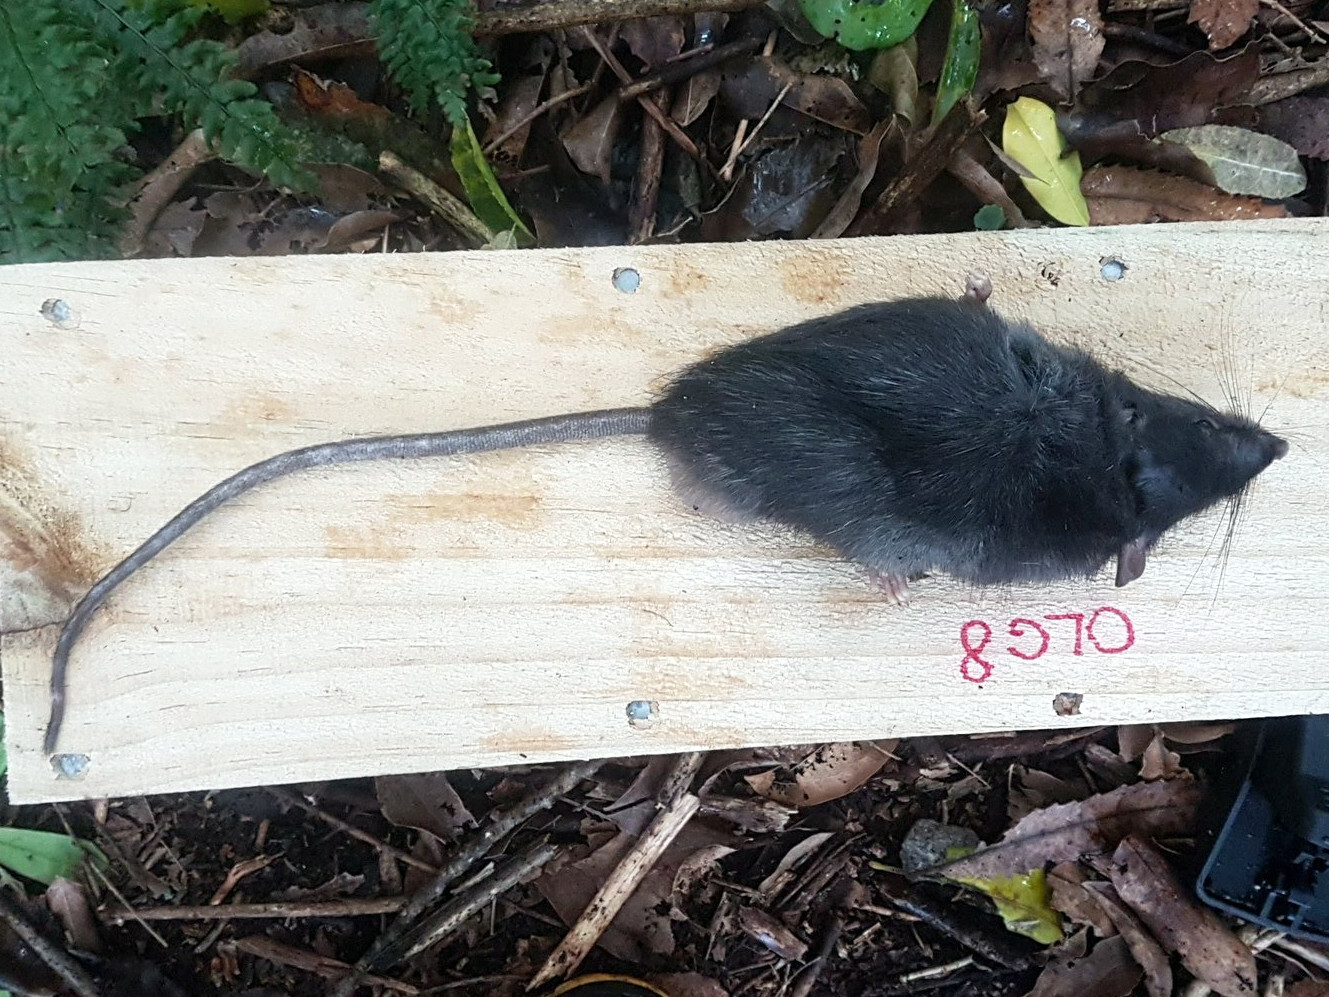 Rat Identification: Types of Rats in NC